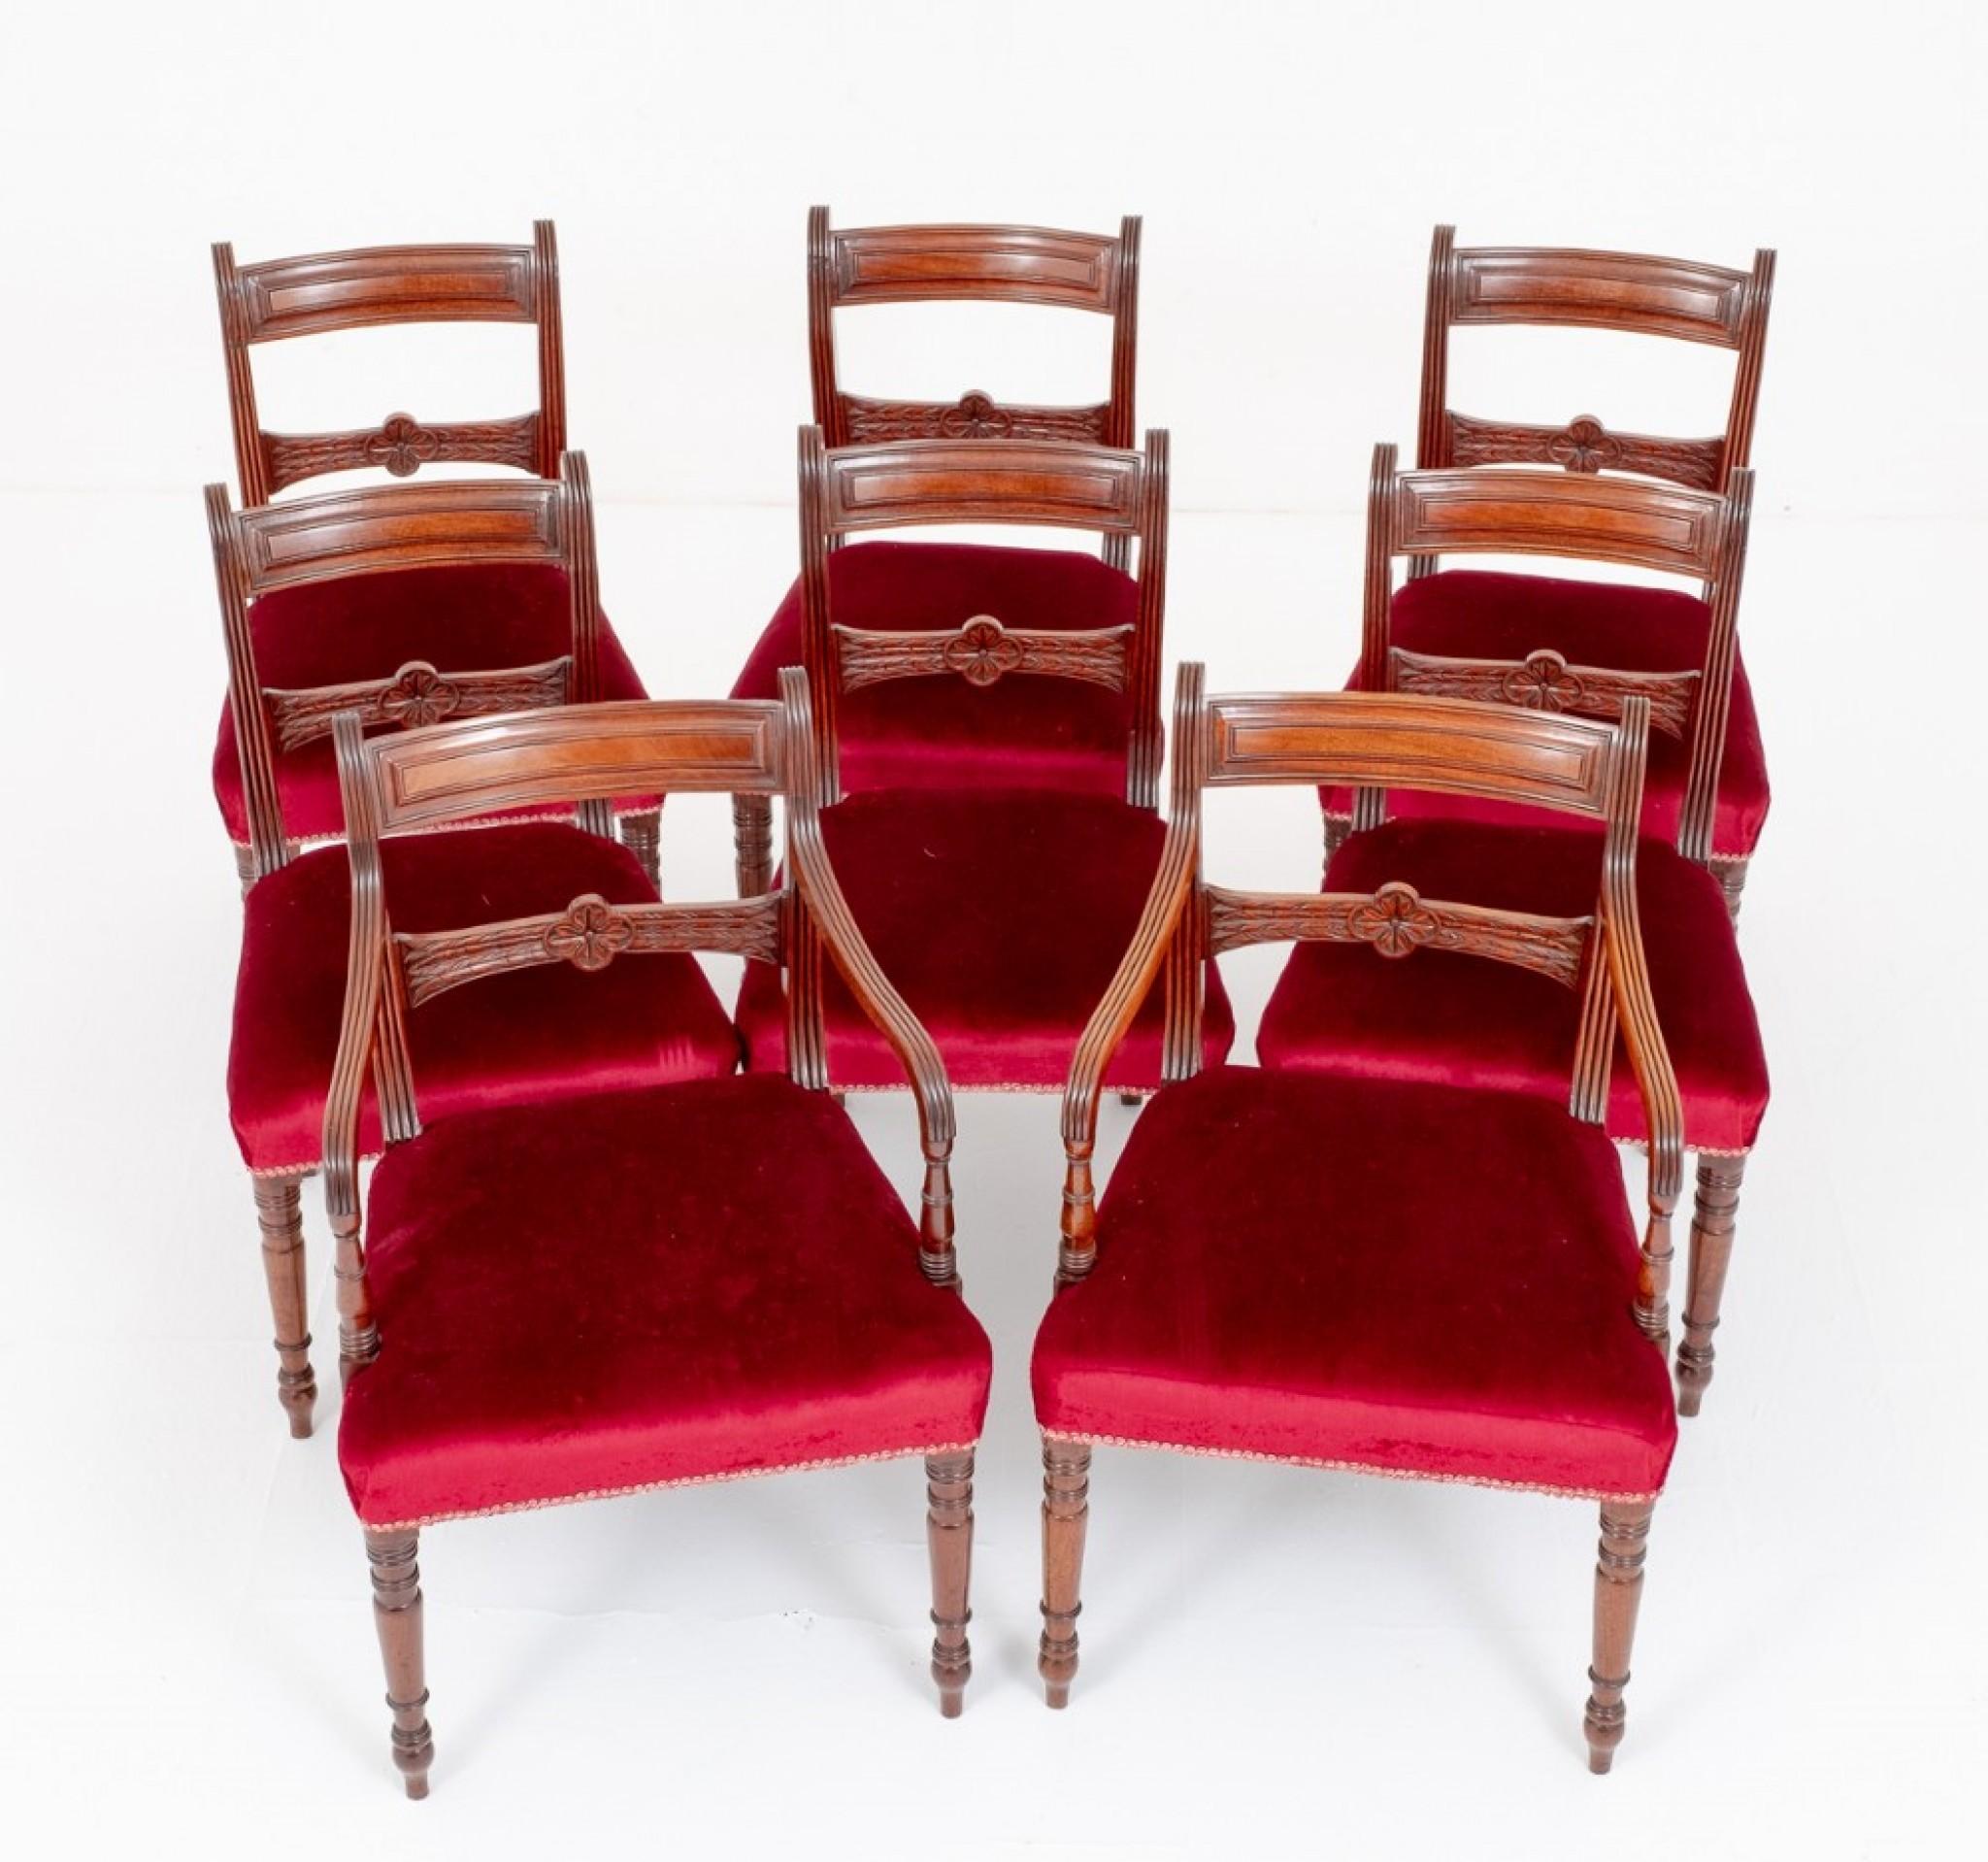 Good Set of 8 (6 + 2) Mahogany Regency Bar Back Dining Chairs.
Raised upon typical Regency Ring Turned Front Legs, the back legs being of a Sabre form.
The Carvers having Shaped Arms with reeded mouldings.
The centre rails with carved leaves and